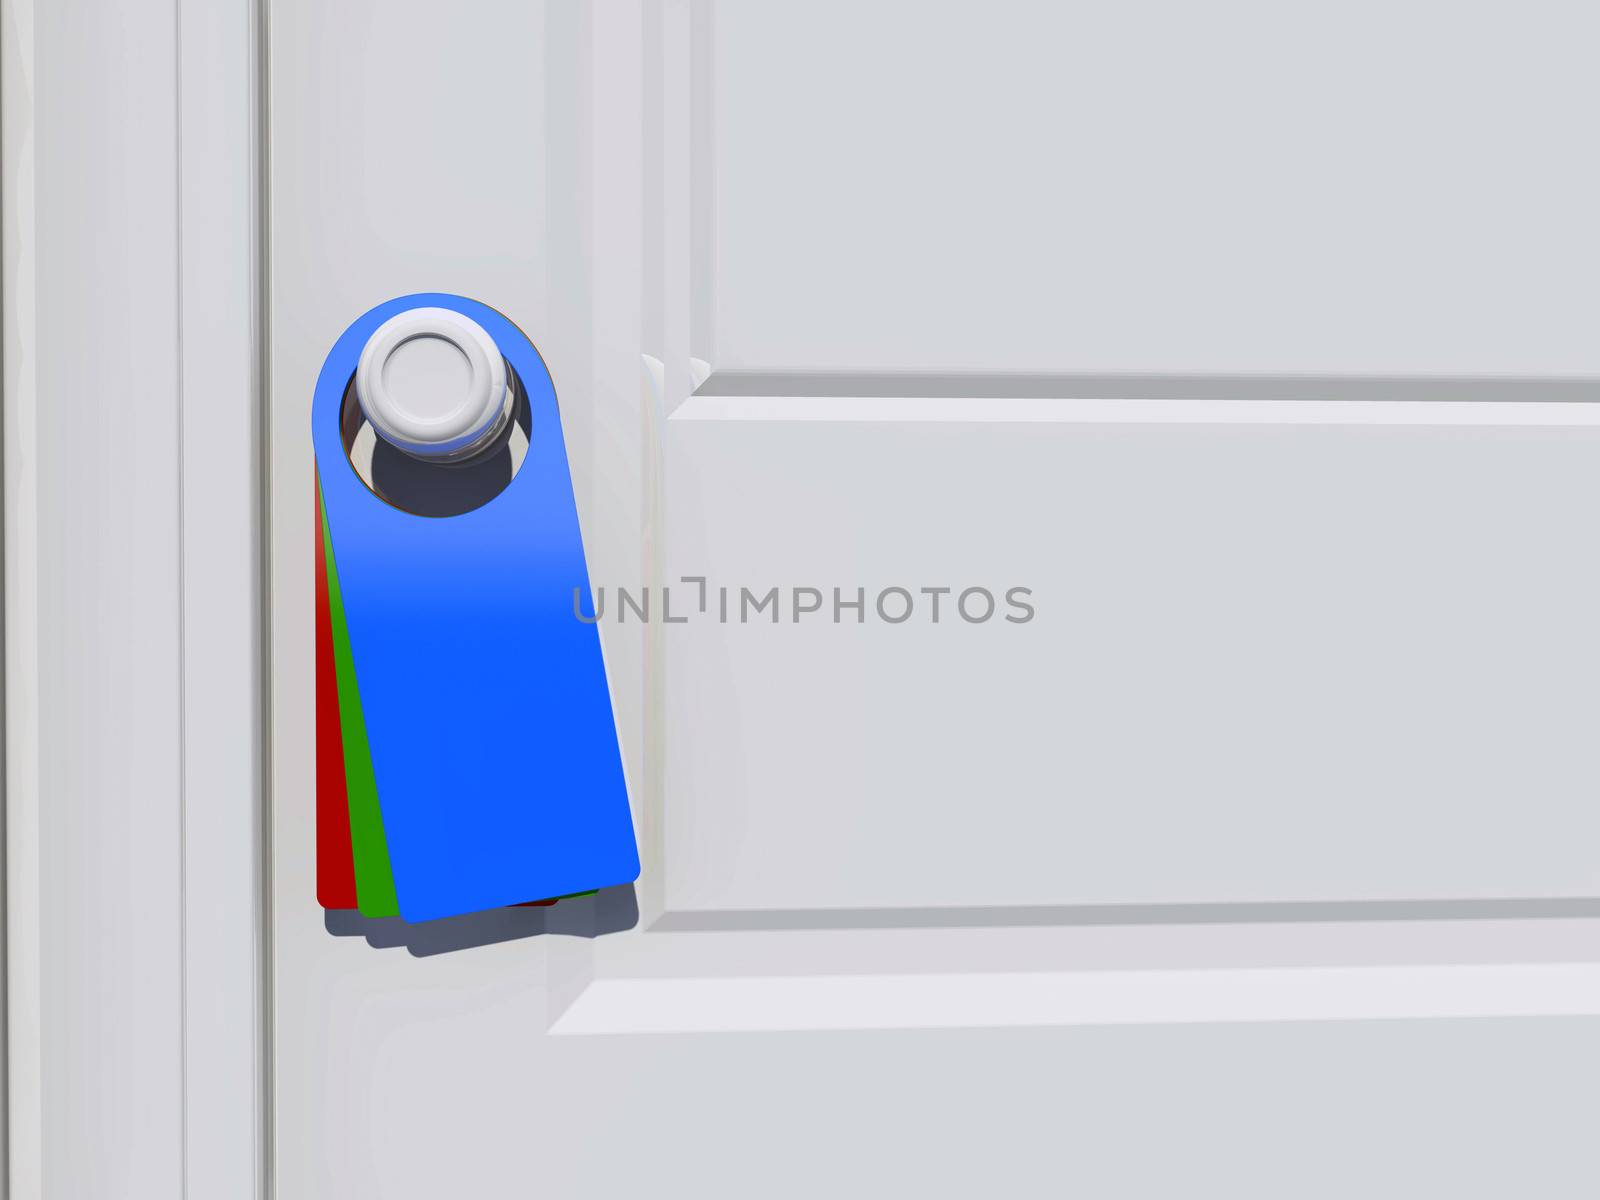 3d Blank tag on the door handle